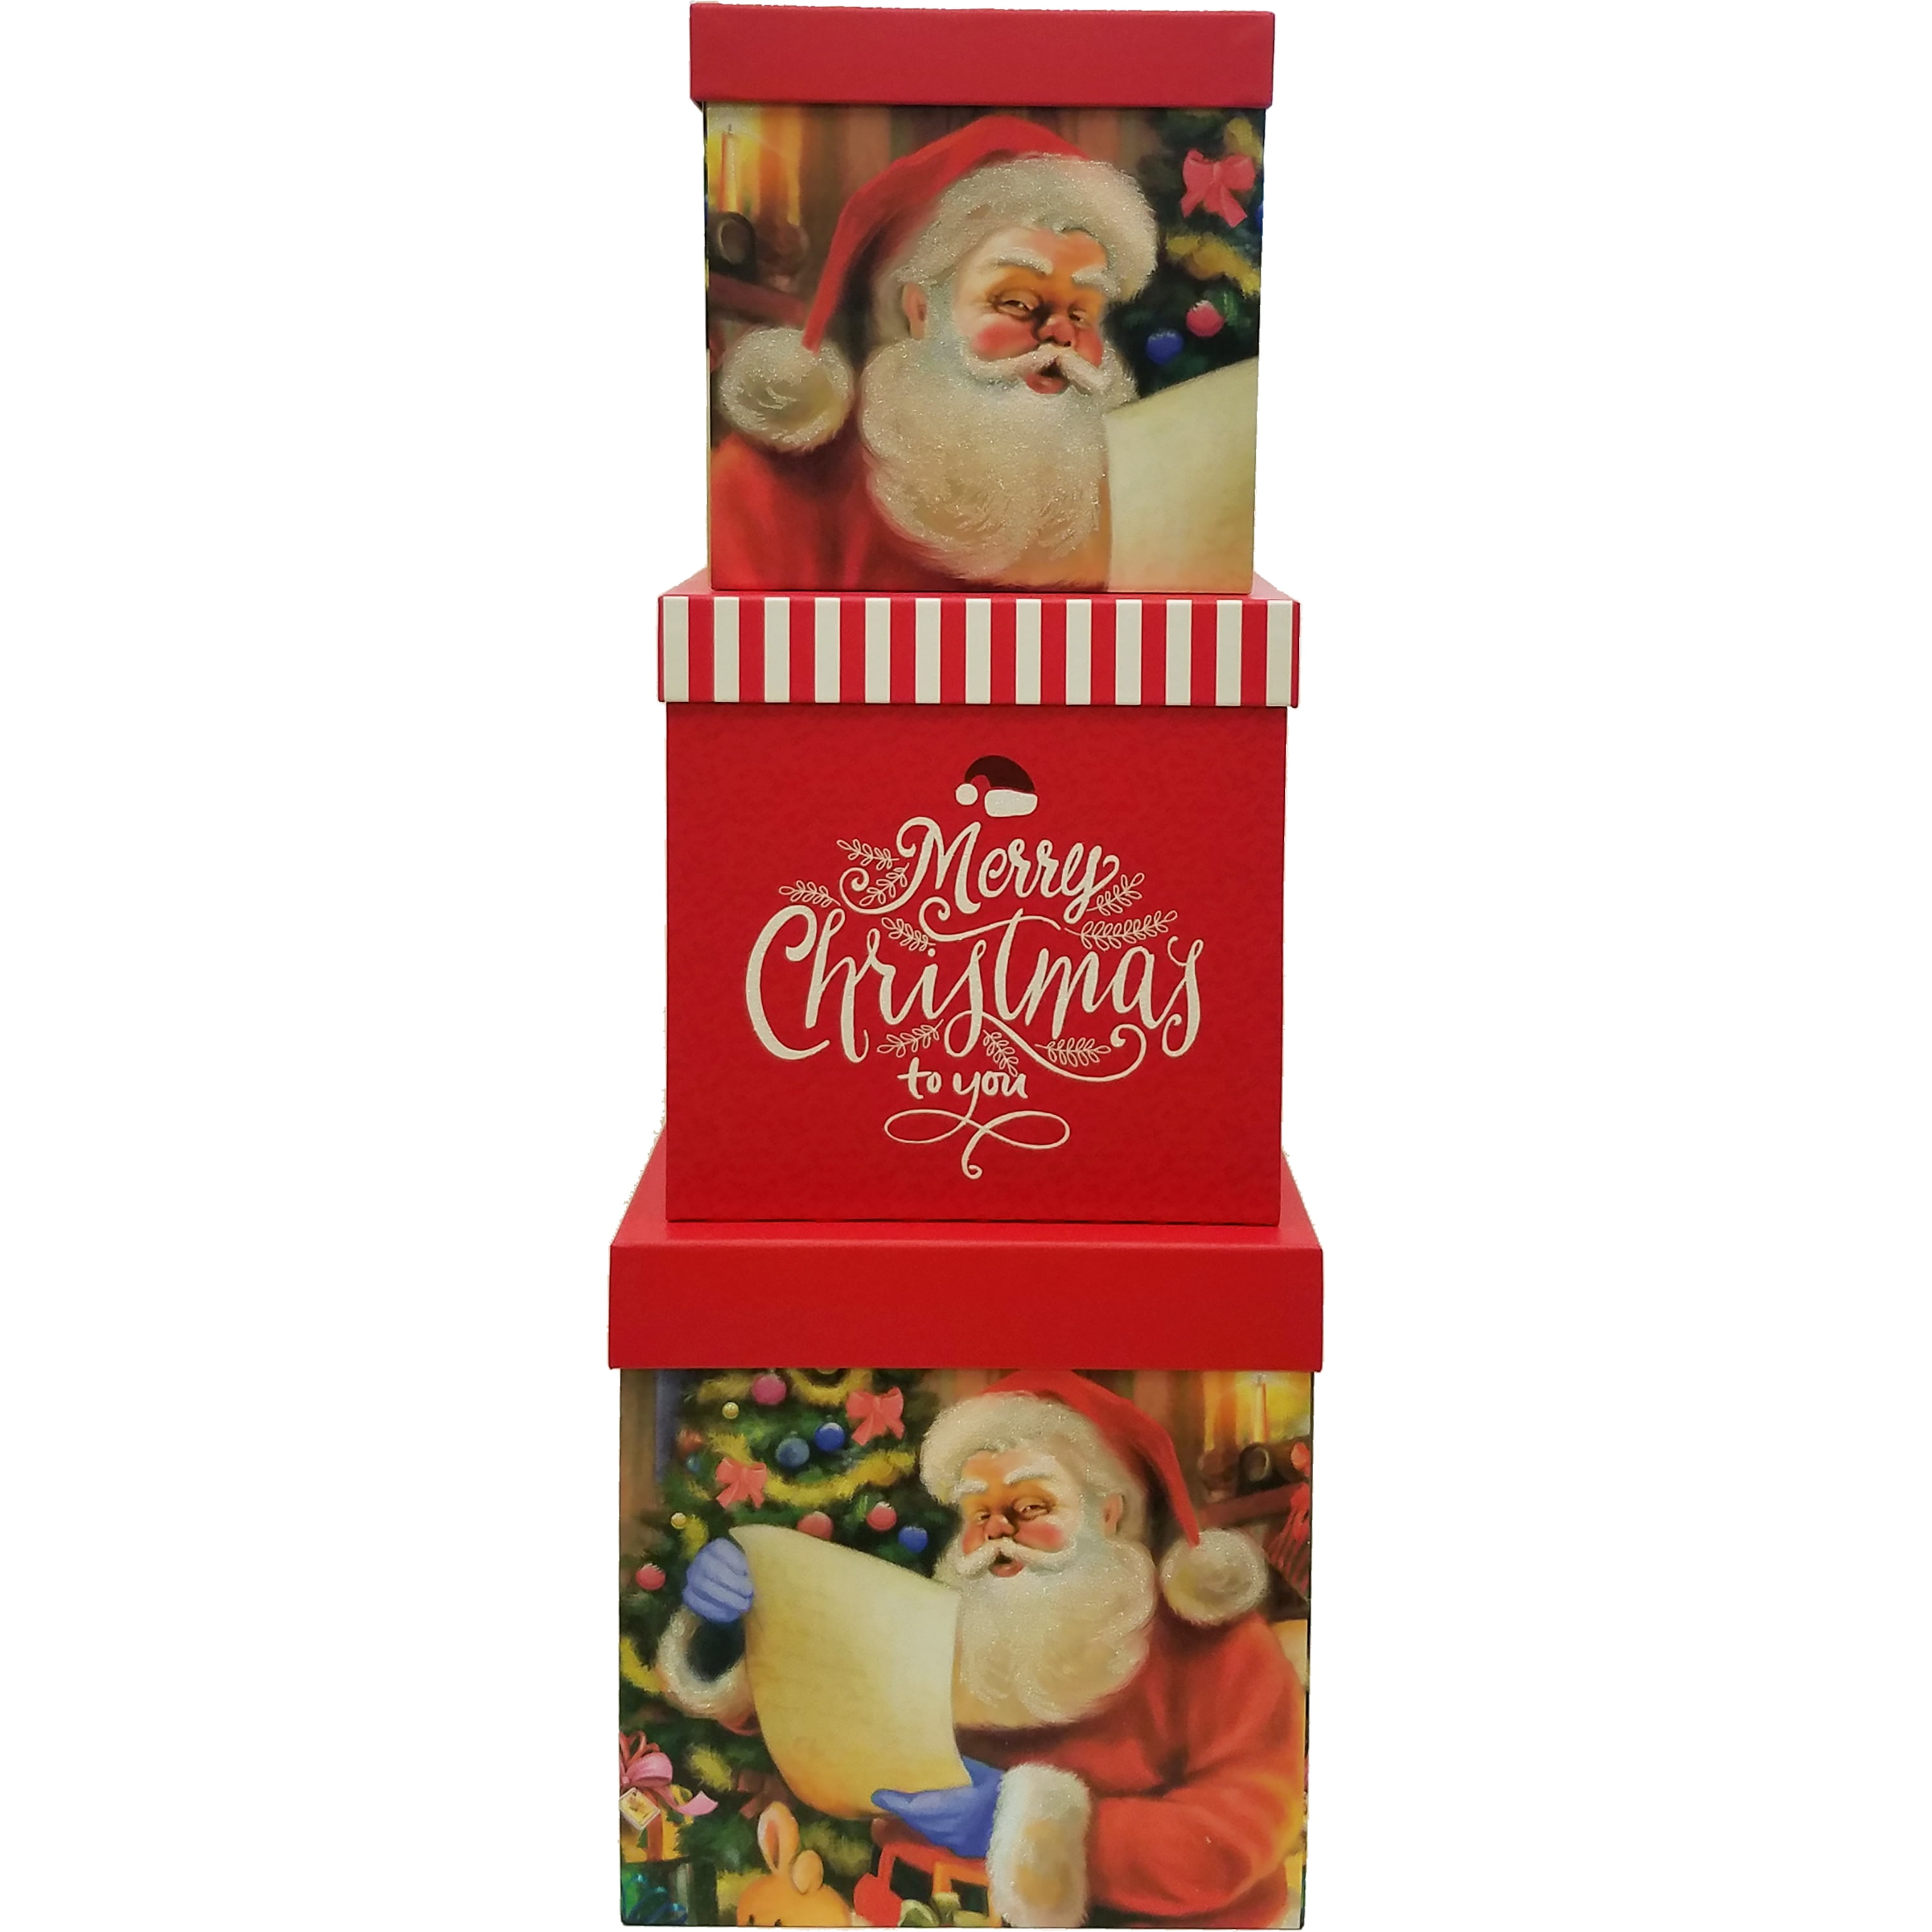 Holiday Time Square Christmas Gift Boxes, Red and White Glitter Santa, 3 Sizes, Set of 3